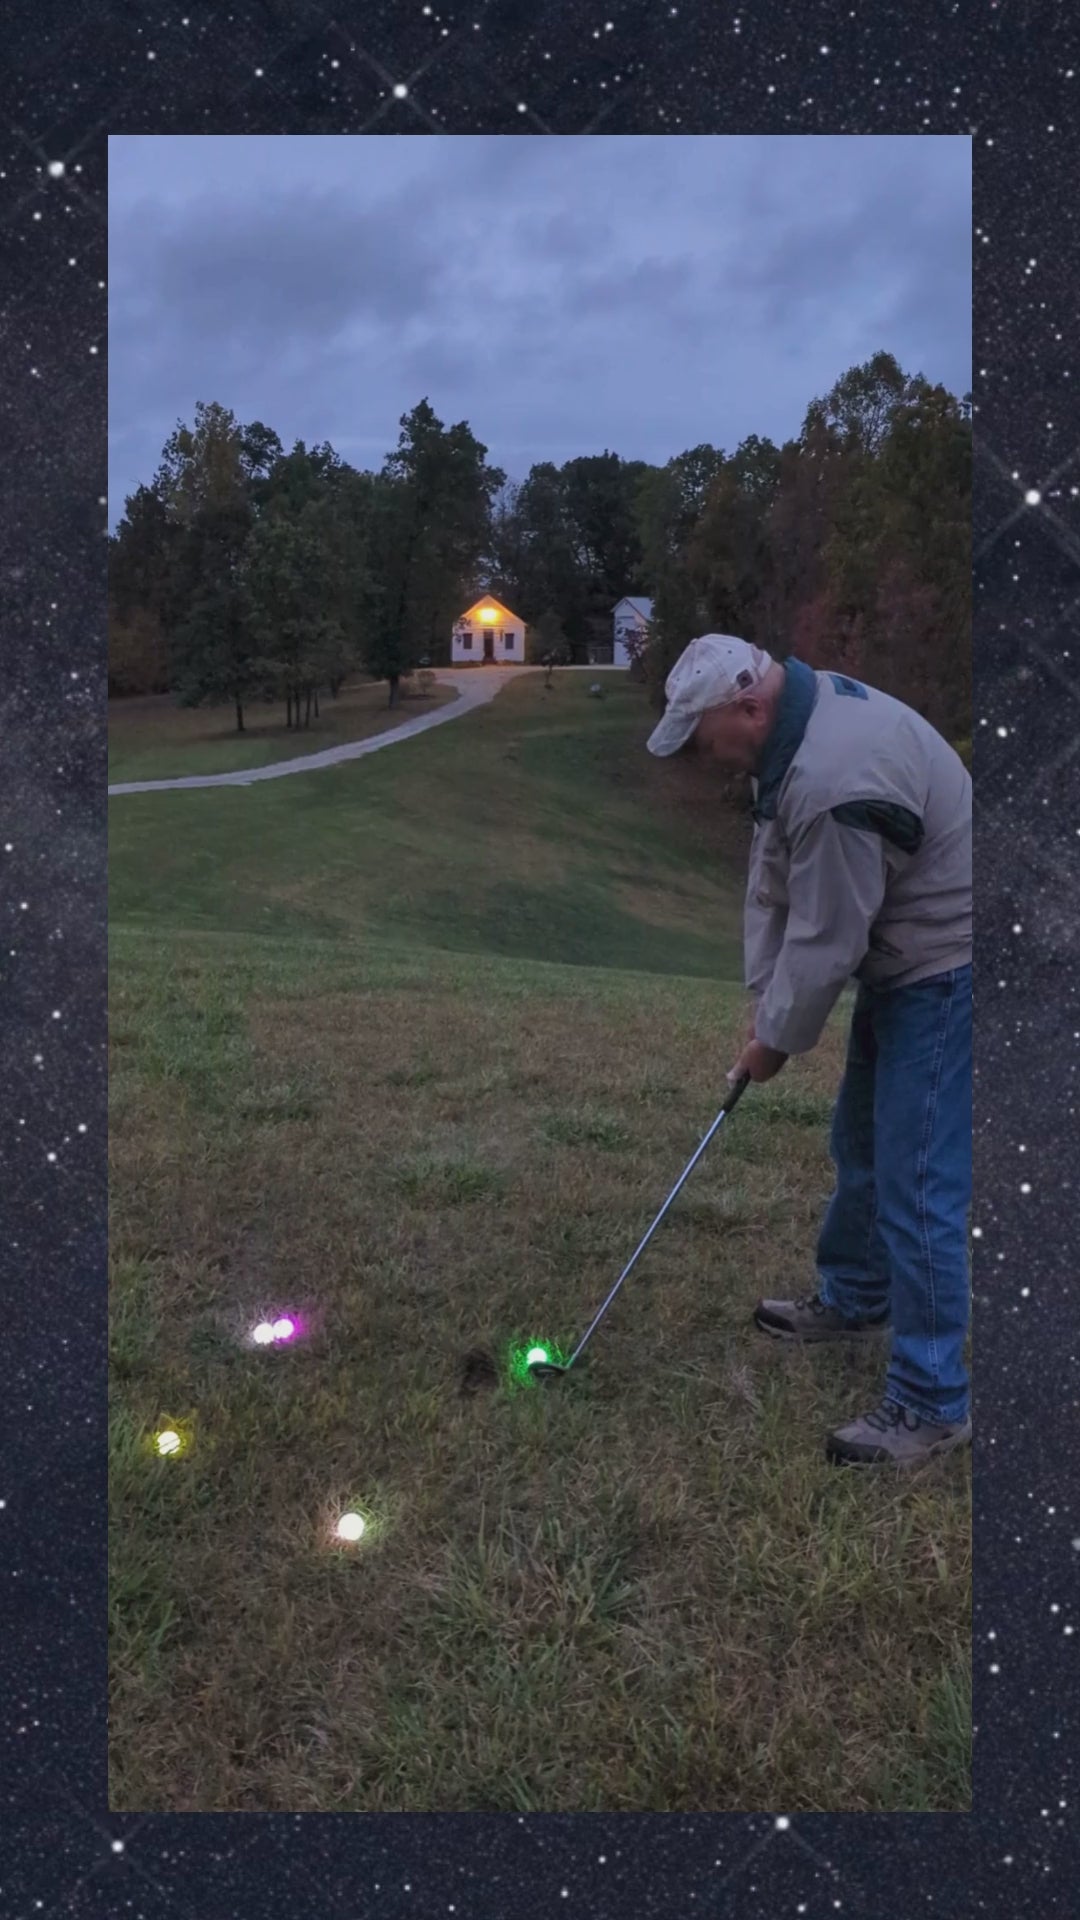 Night Golf with LIT night golf balls with LED